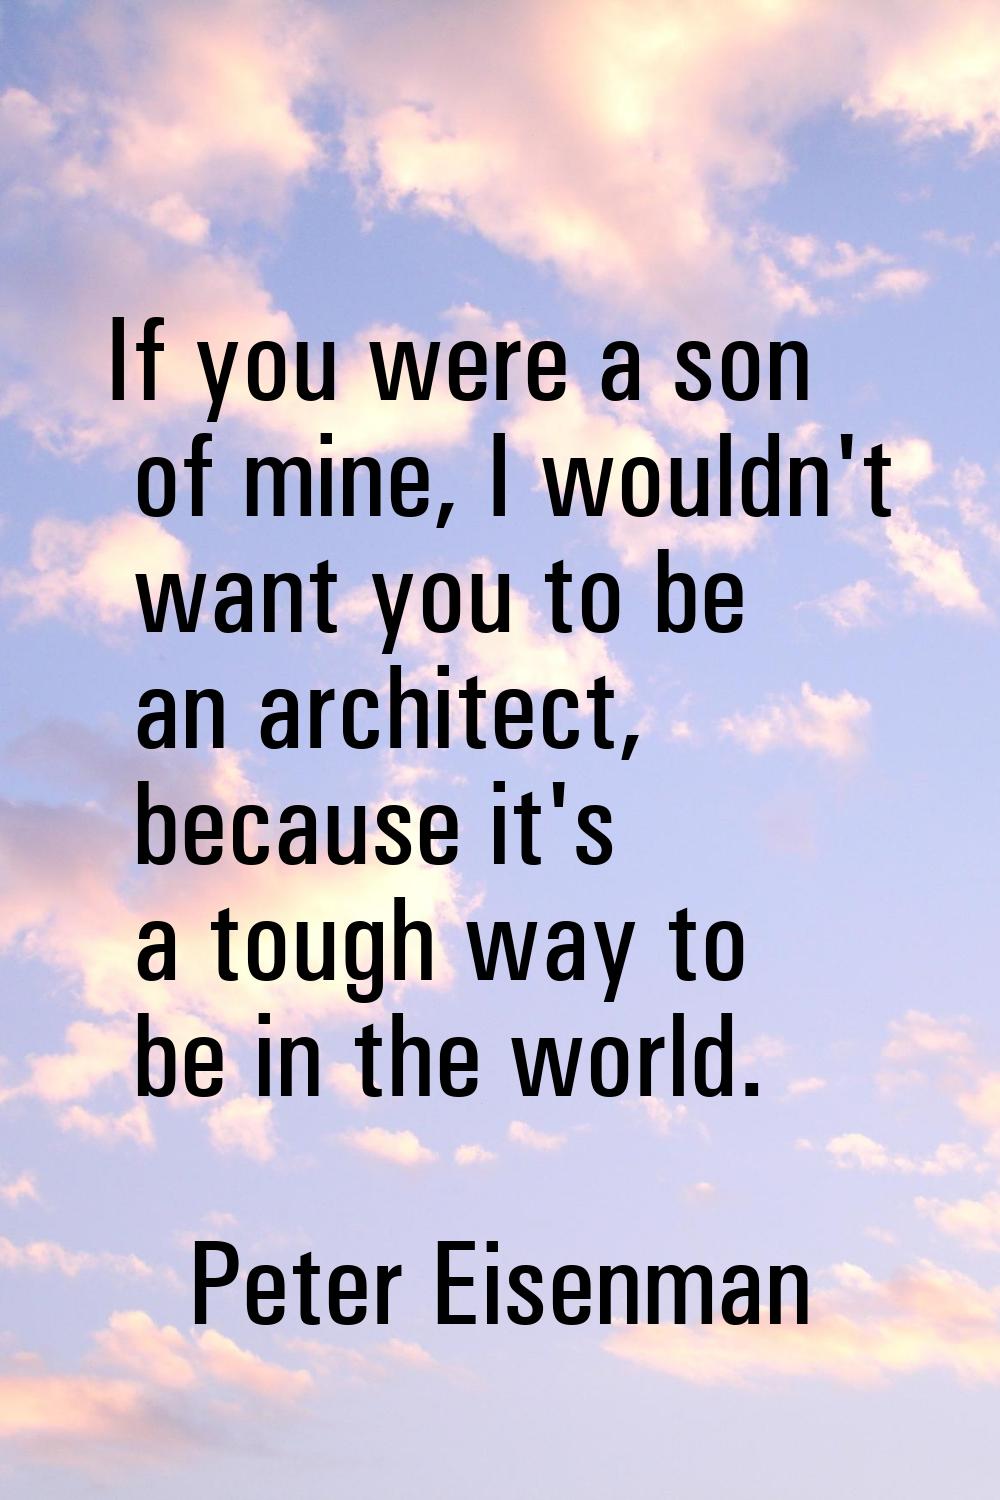 If you were a son of mine, I wouldn't want you to be an architect, because it's a tough way to be i